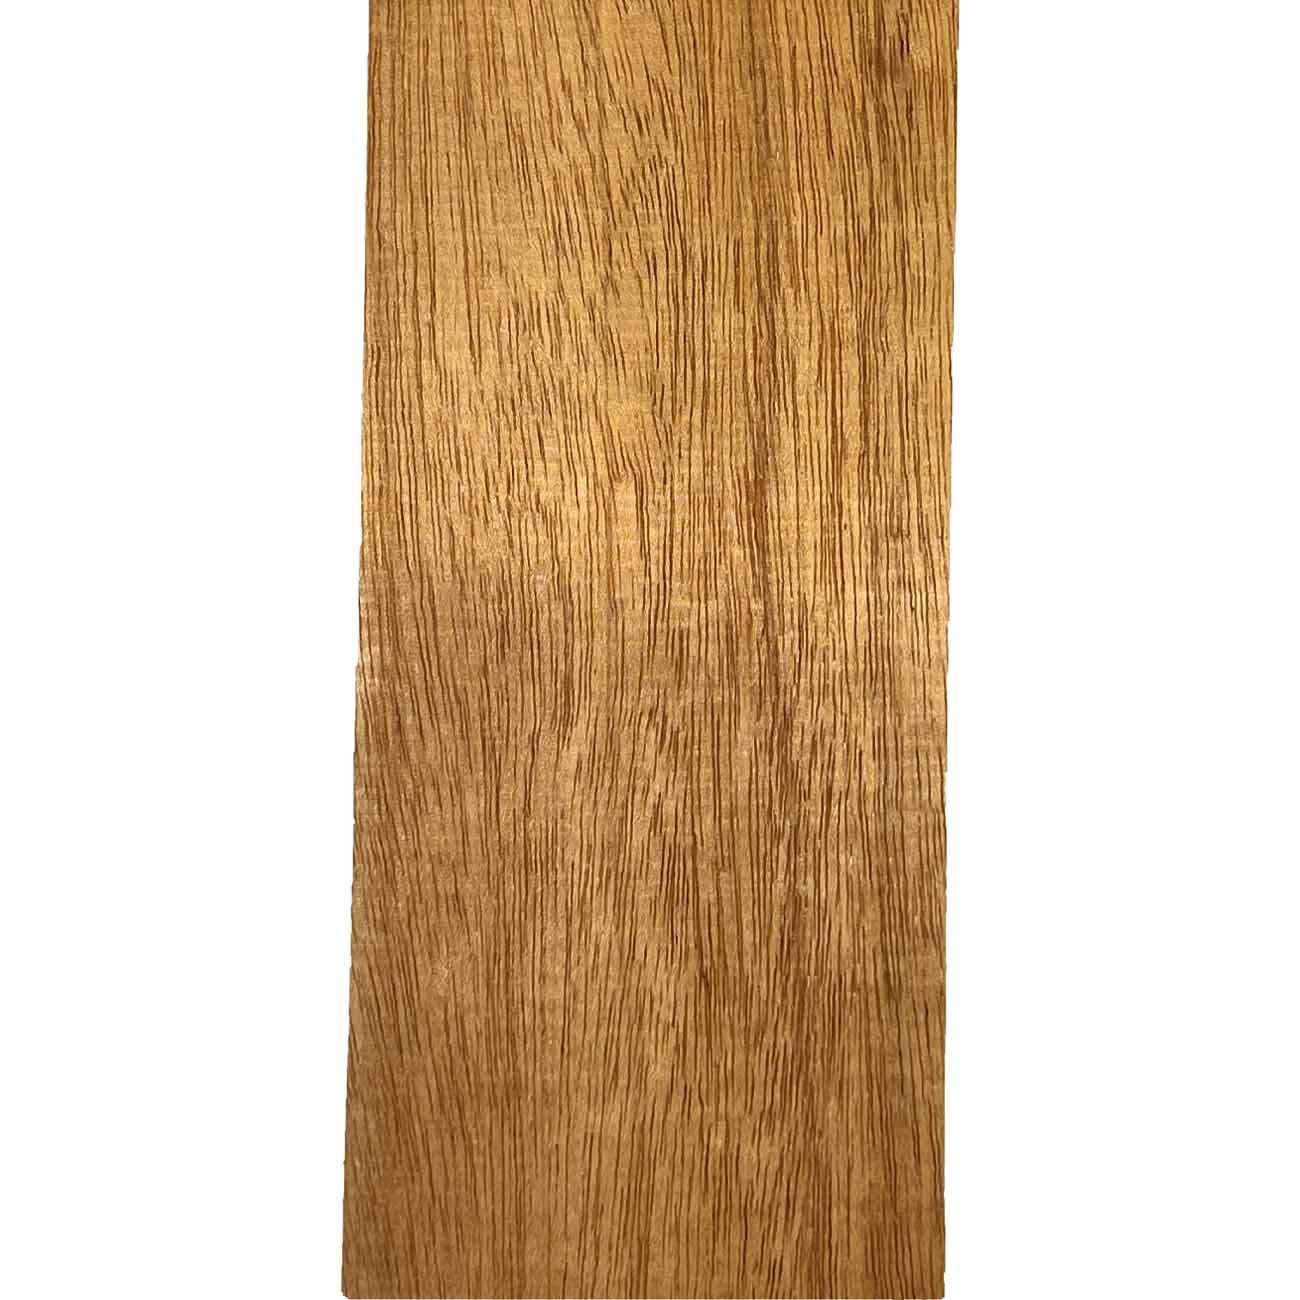 Fijian Mahogany Thin Stock Lumber Boards Wood Crafts, 21&quot; x 2-3/4&quot; x 1/2&quot; - Exotic Wood Zone - Buy online Across USA 